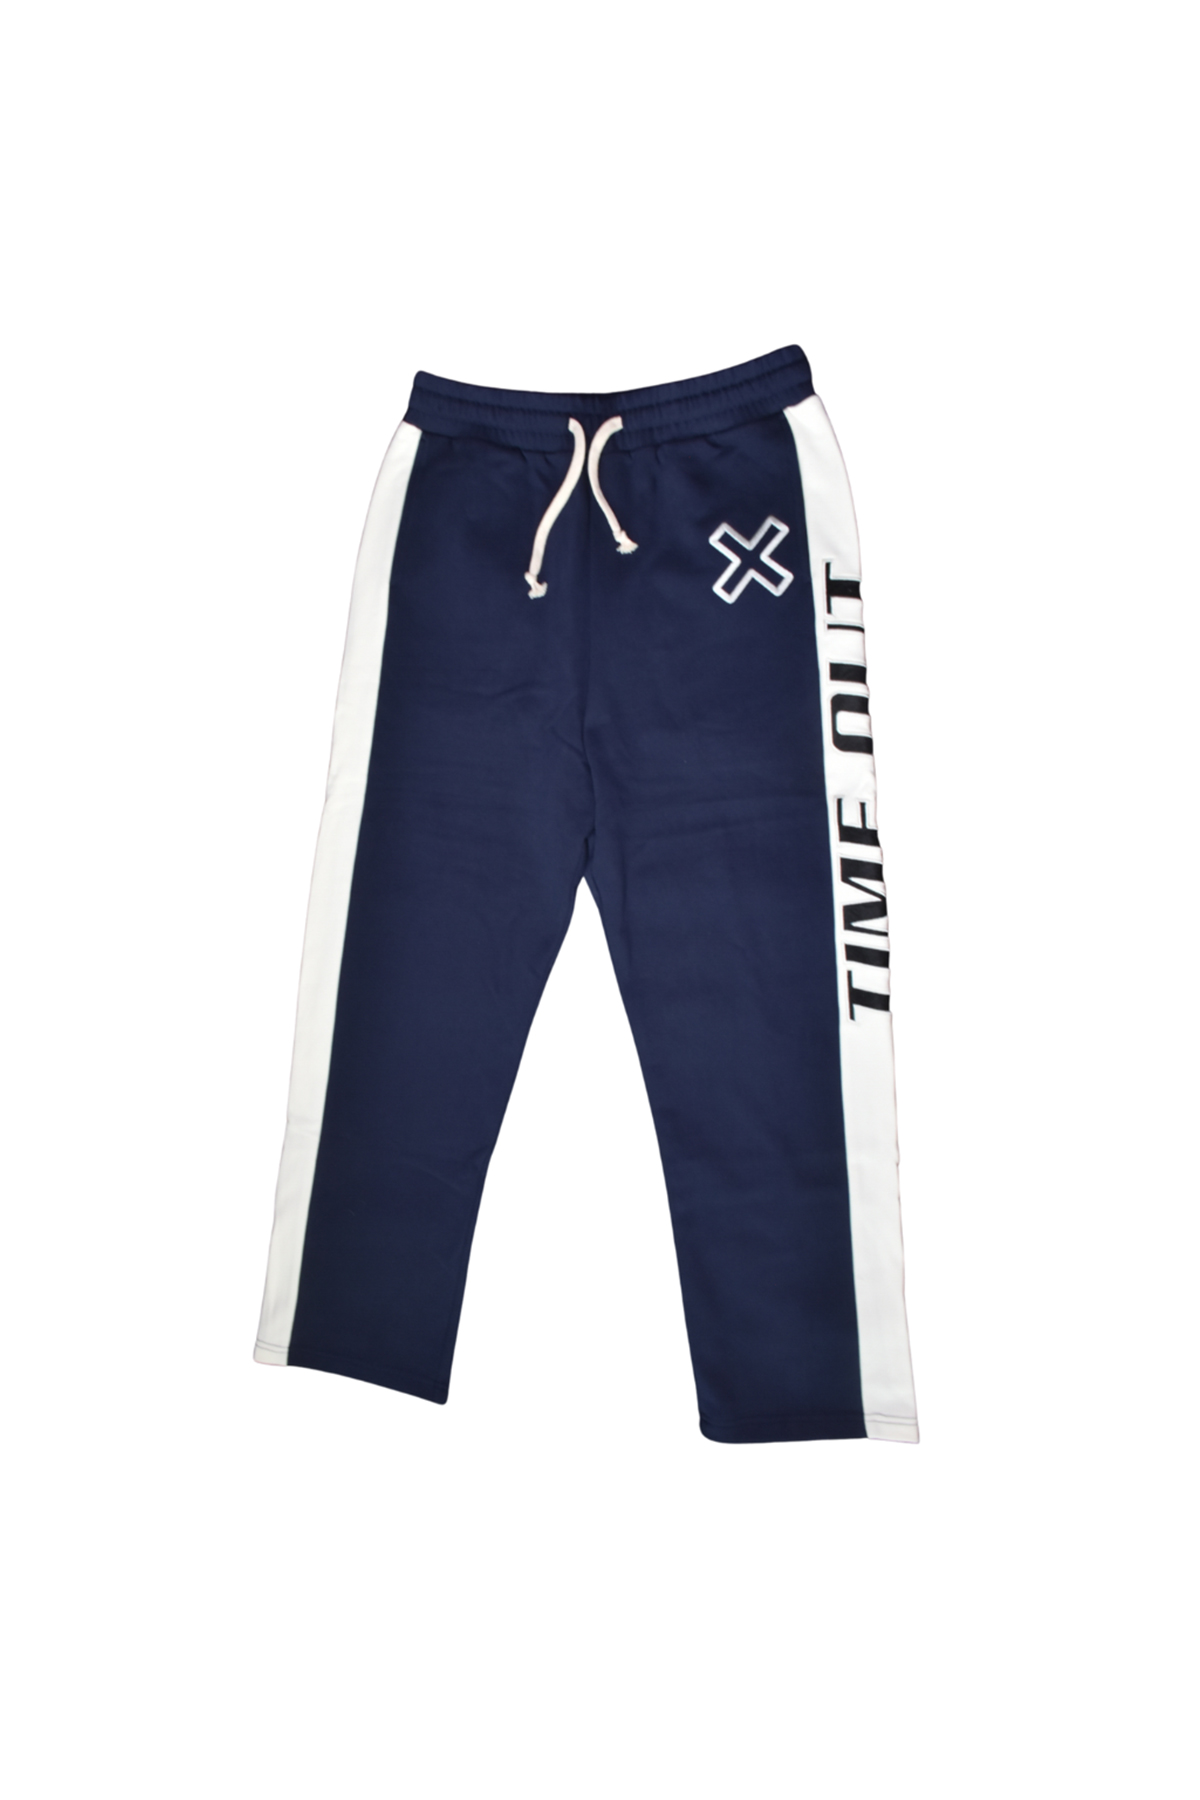 Time-Out-X-Track-Pants—Navy-Blue—Front